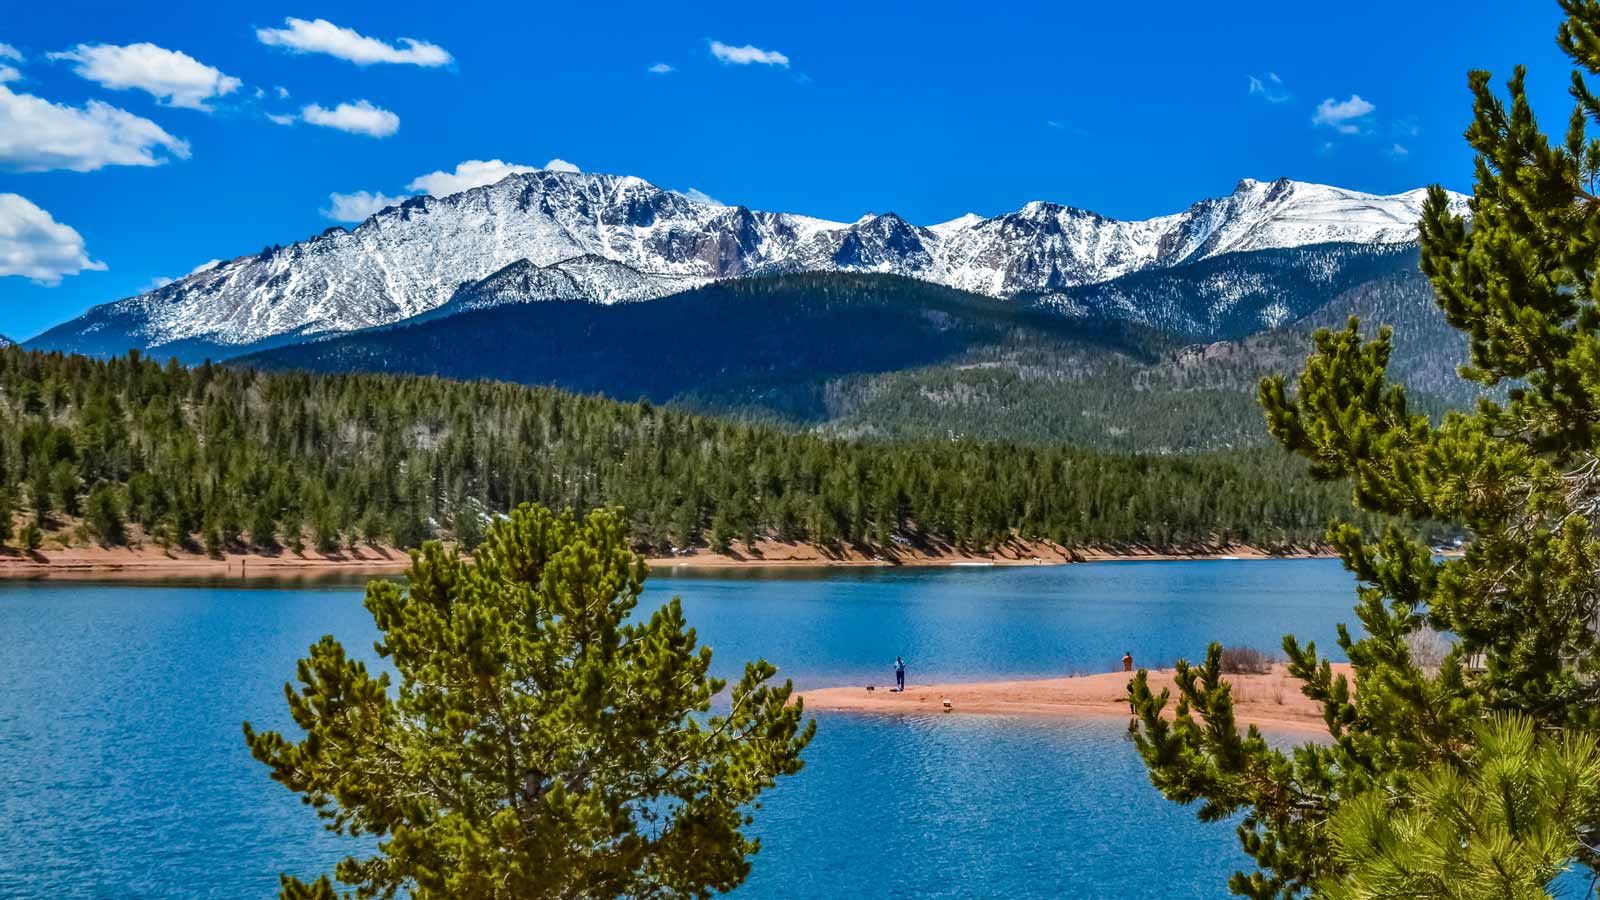 <p>At 14,115 feet tall, Pikes Peak is one of the most popular Colorado landmarks. It stands out among the many other tall mountains in the state – and you can venture to the top.</p><p>The cool thing about <a href="https://www.pikes-peak.com/" rel="nofollow noopener">Pikes Peak is its accessibility</a>. If you’re active, you can hike or bike to the top. But if you’re not quite as intense, you can take a lovely train ride or a leisurely drive to the summit. After all, this is one of those activities where it’s more about the journey than the destination.</p>